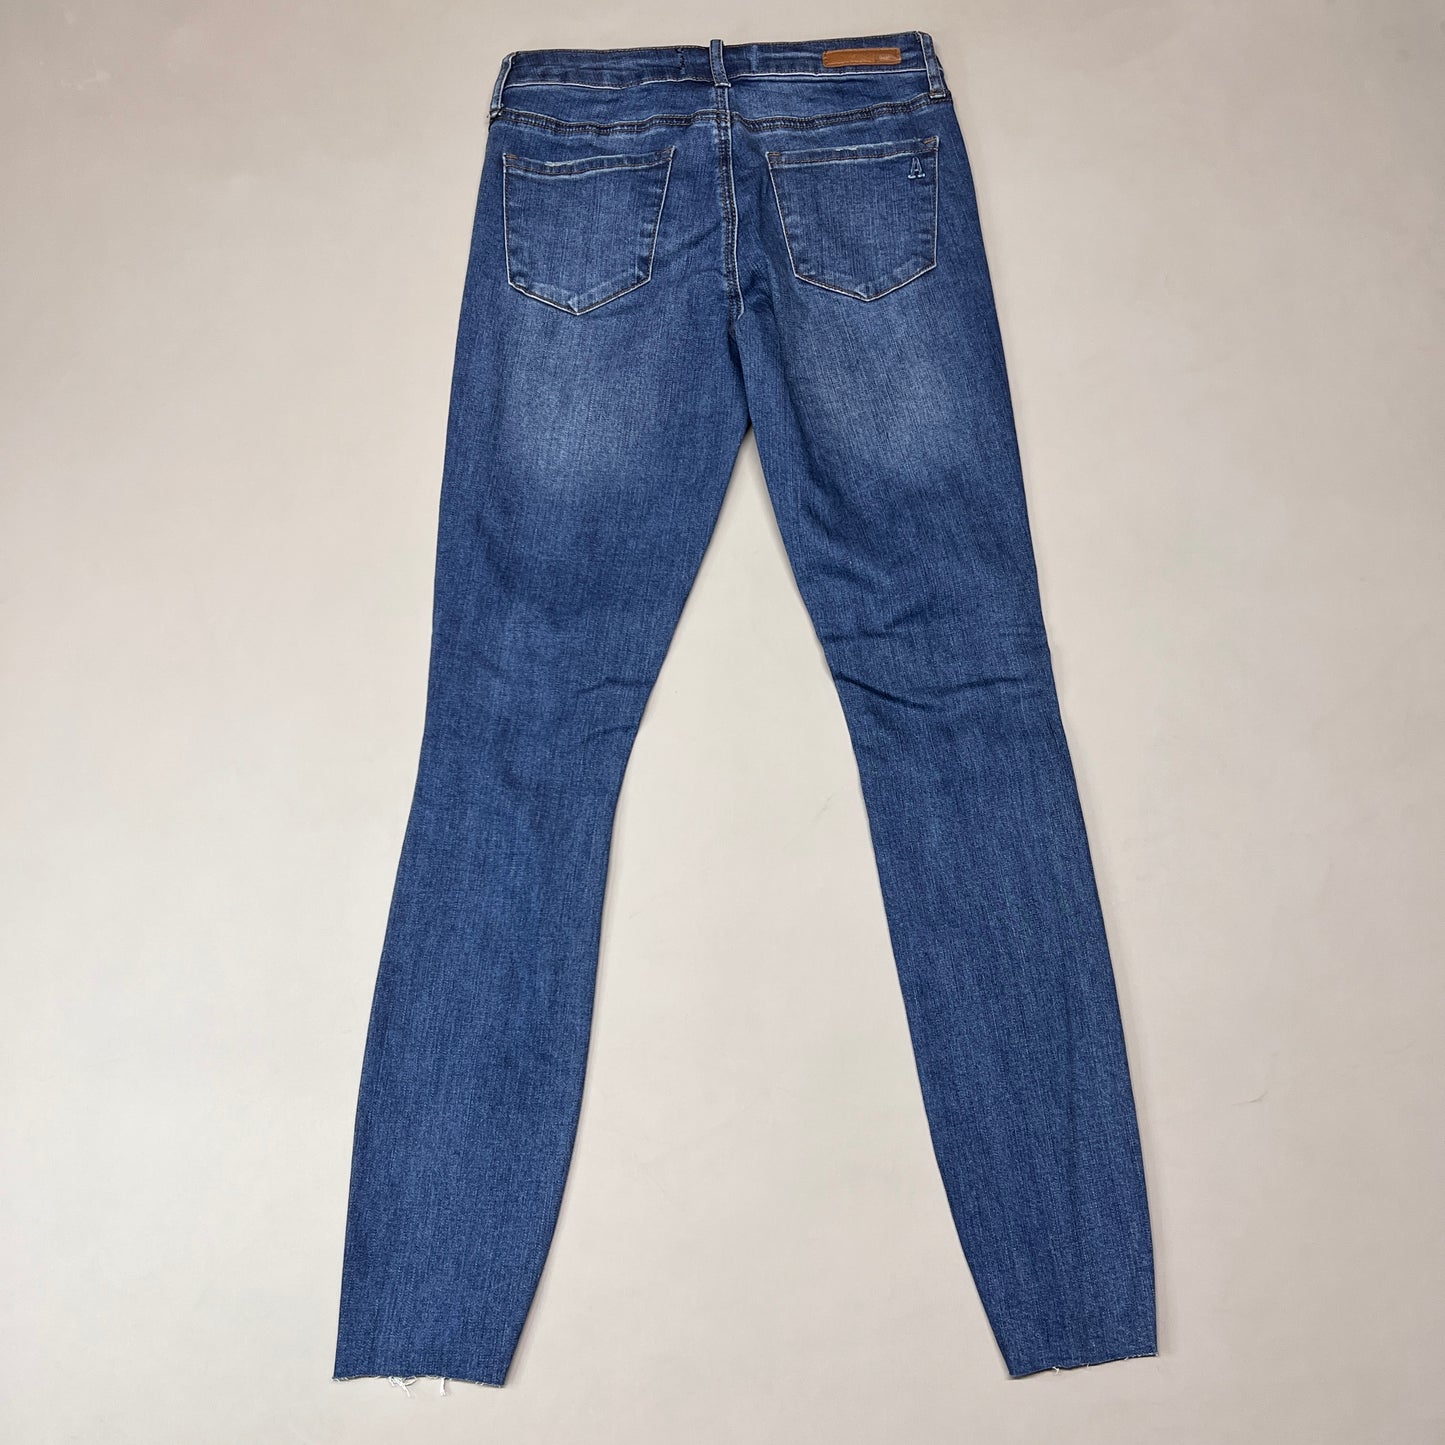 ARTICLES OF SOCIETY Hilo Ripped Denim Jeans Women's Sz 24 Blue 5350PLV-706 (New)